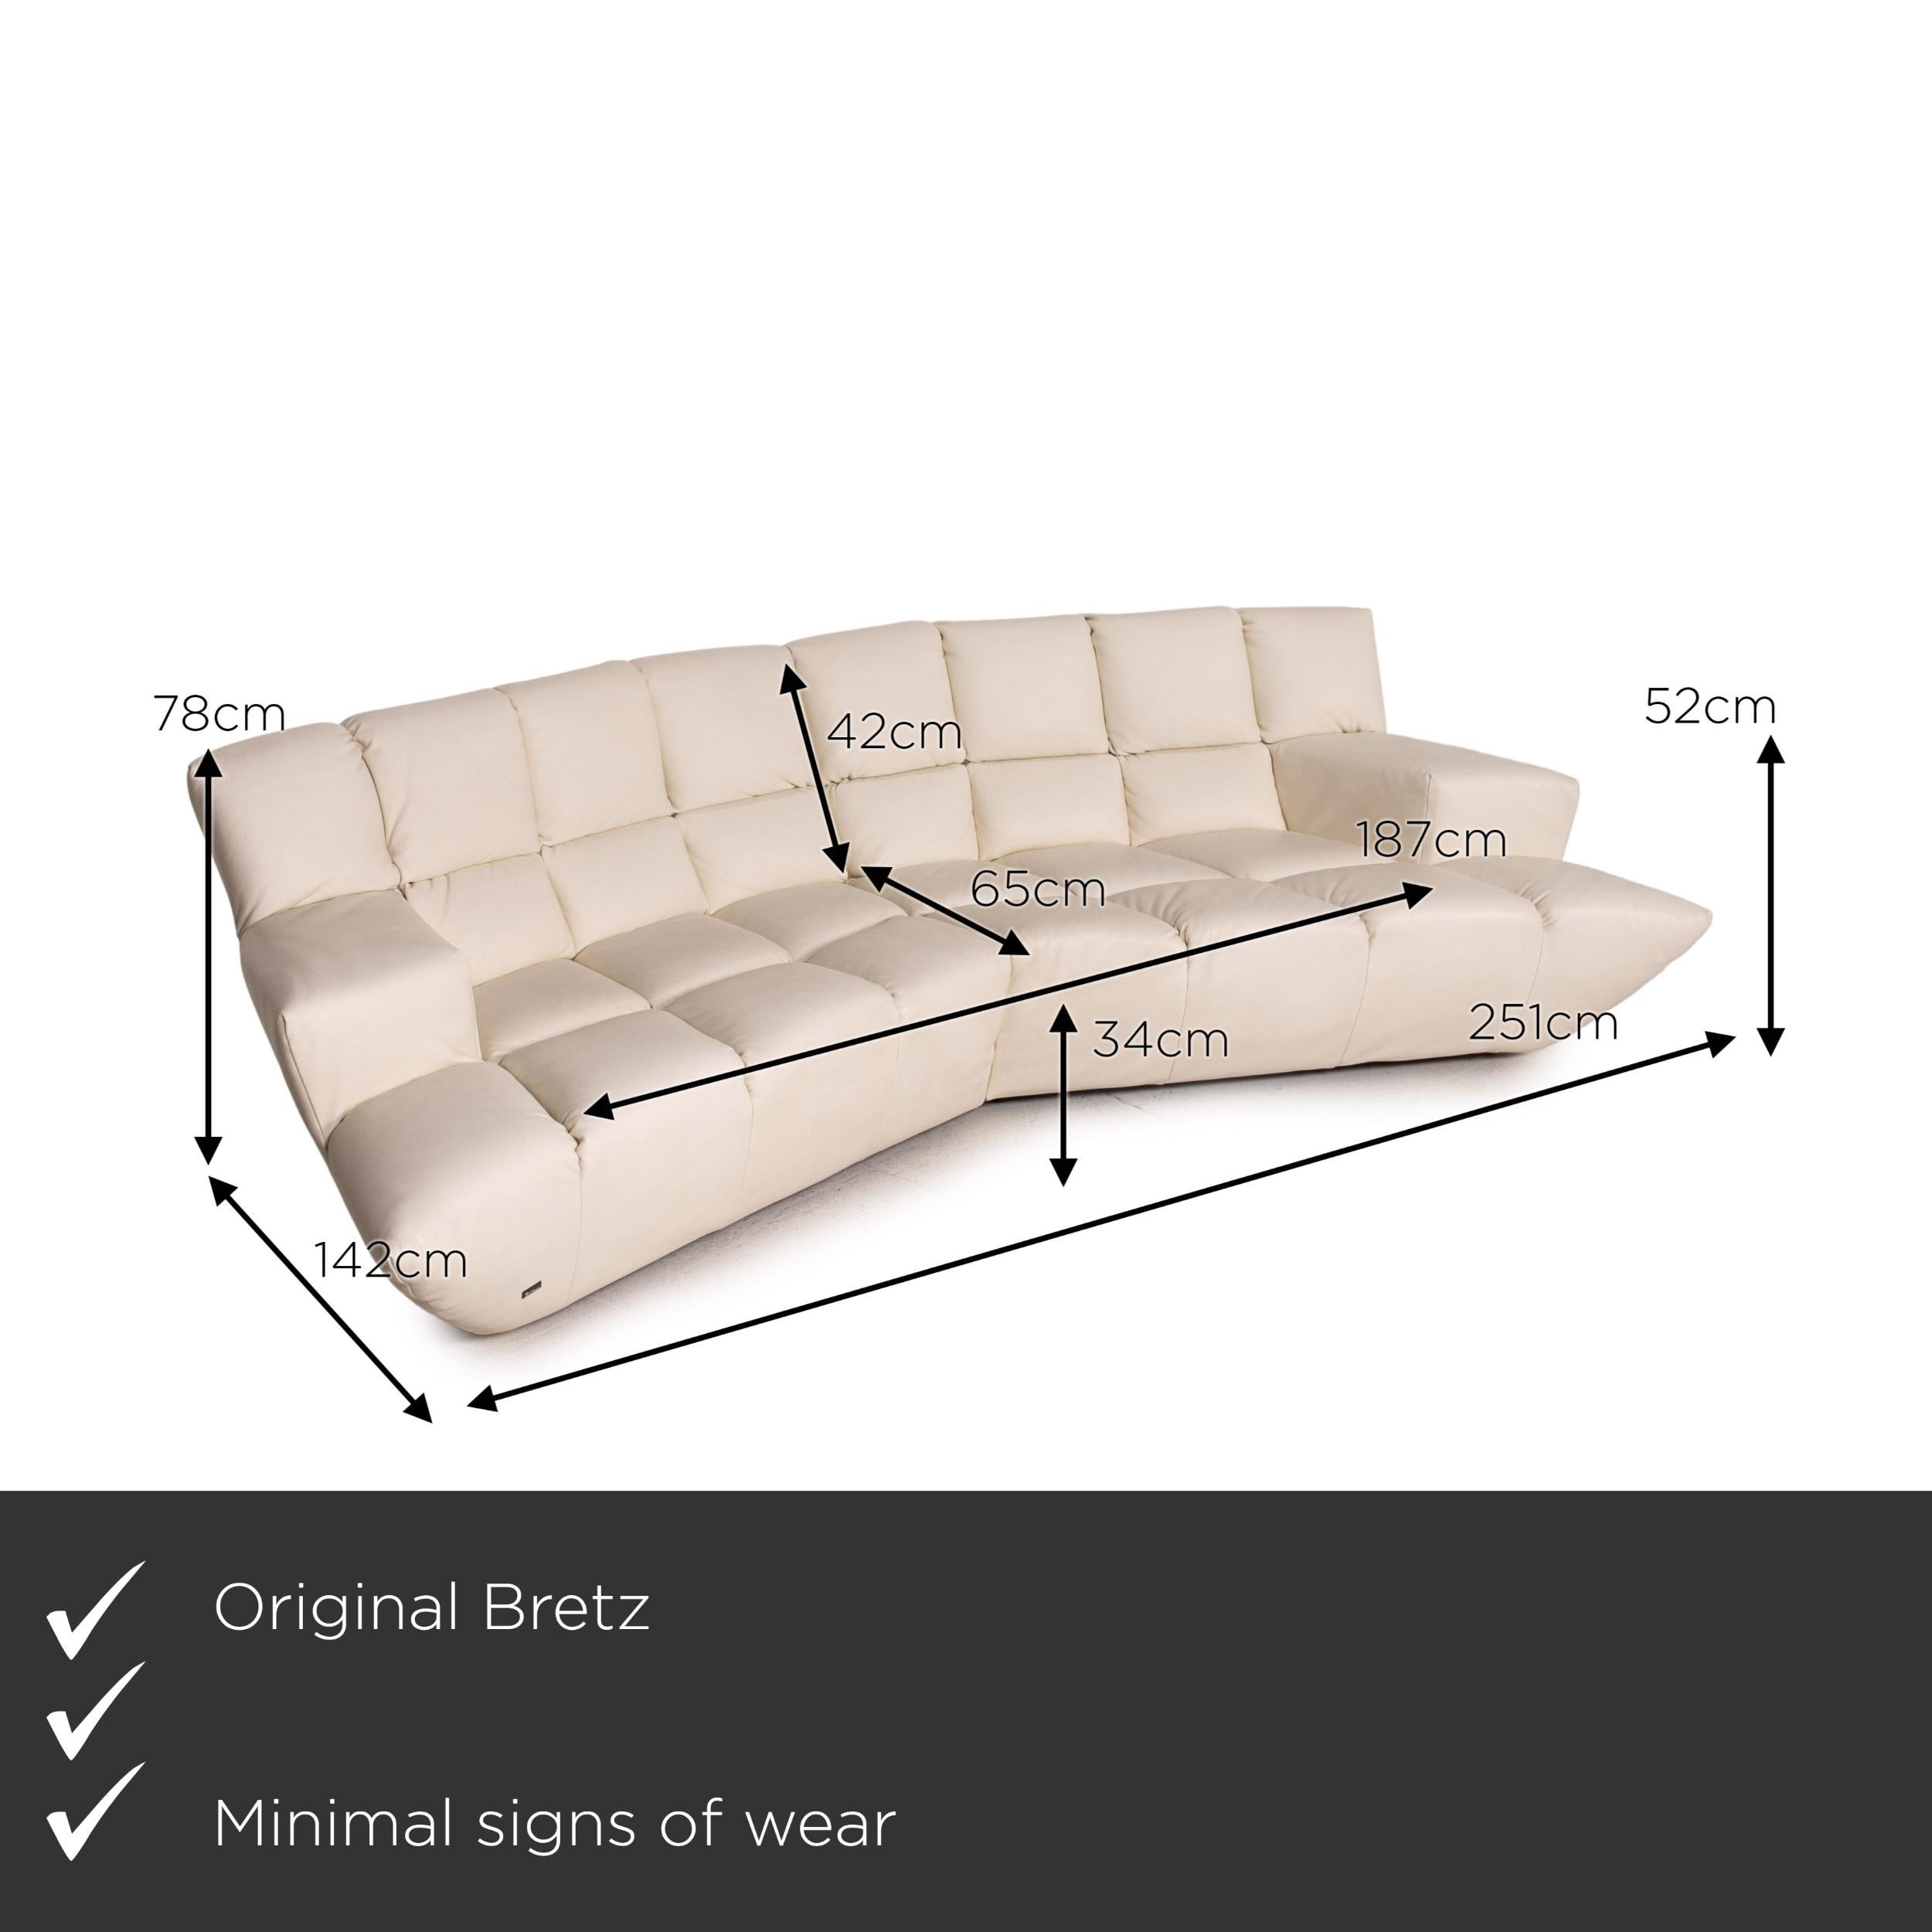 We present to you a Bretz Cloud 7 leather corner sofa cream couch.
 

 Product measurements in centimeters:
 

Depth: 142
Width: 251
Height: 78
Seat height: 34
Rest height: 52
Seat depth: 65
Seat width: 187
Back height: 42.
 